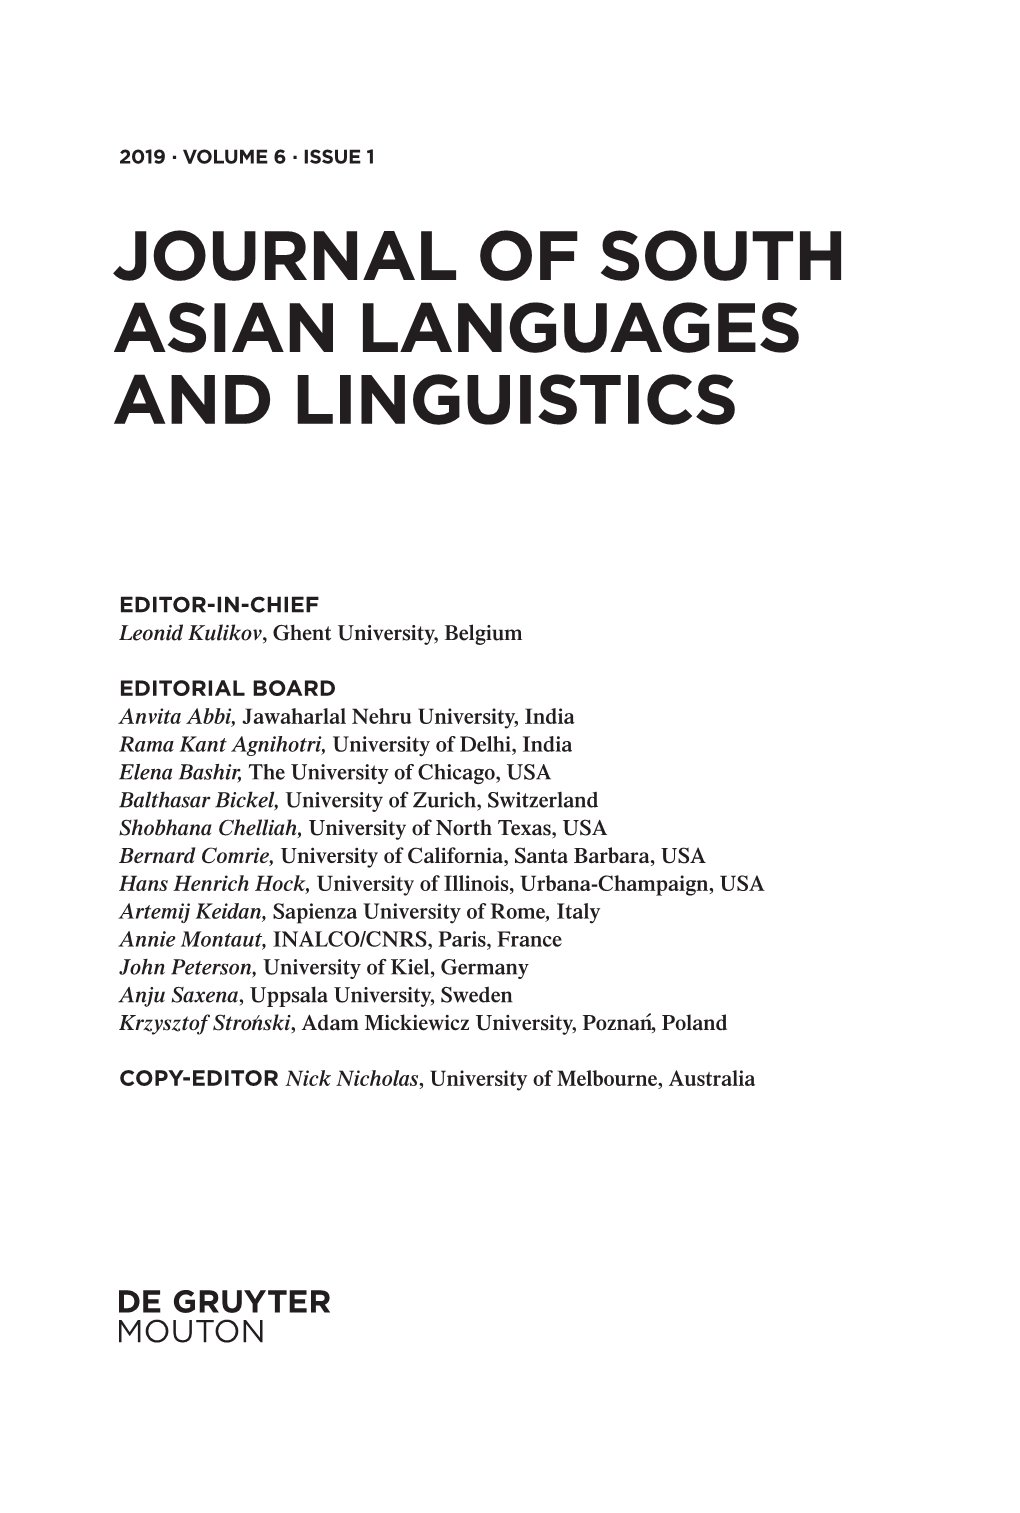 Journal of South Asian Languages and Linguistics